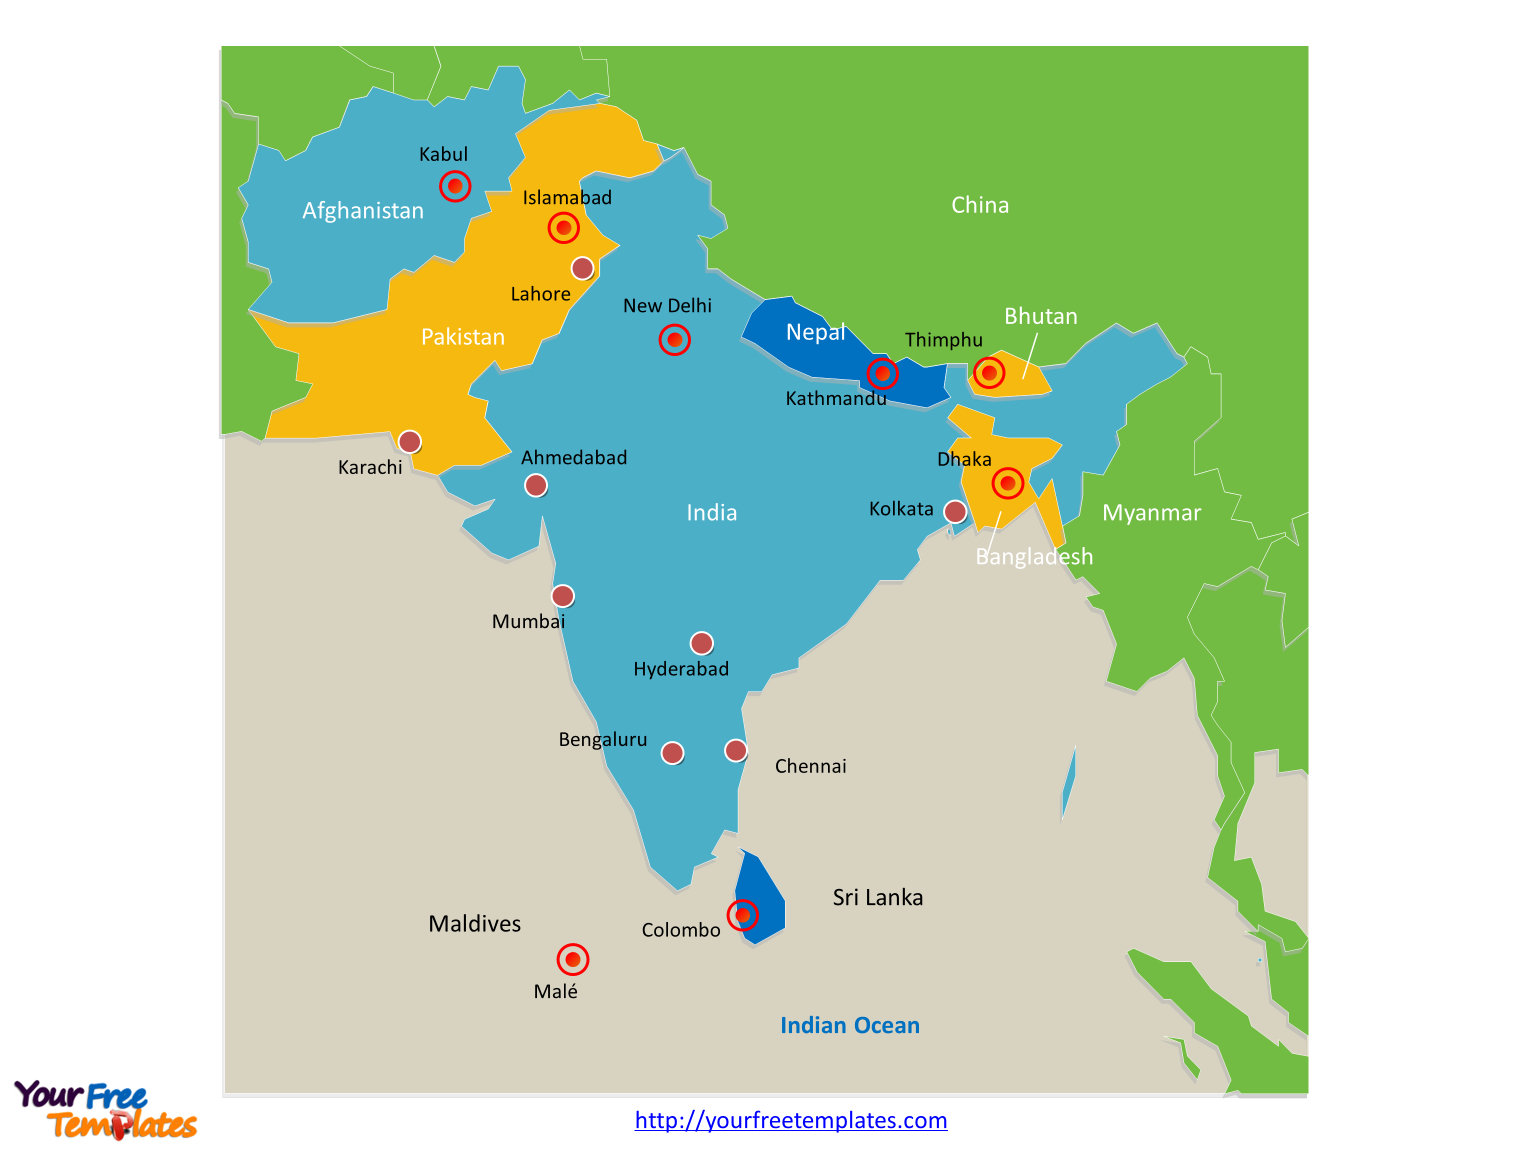 South Asia Map Free Templates - Free Powerpoint Templates Throughout Blank City Map Template